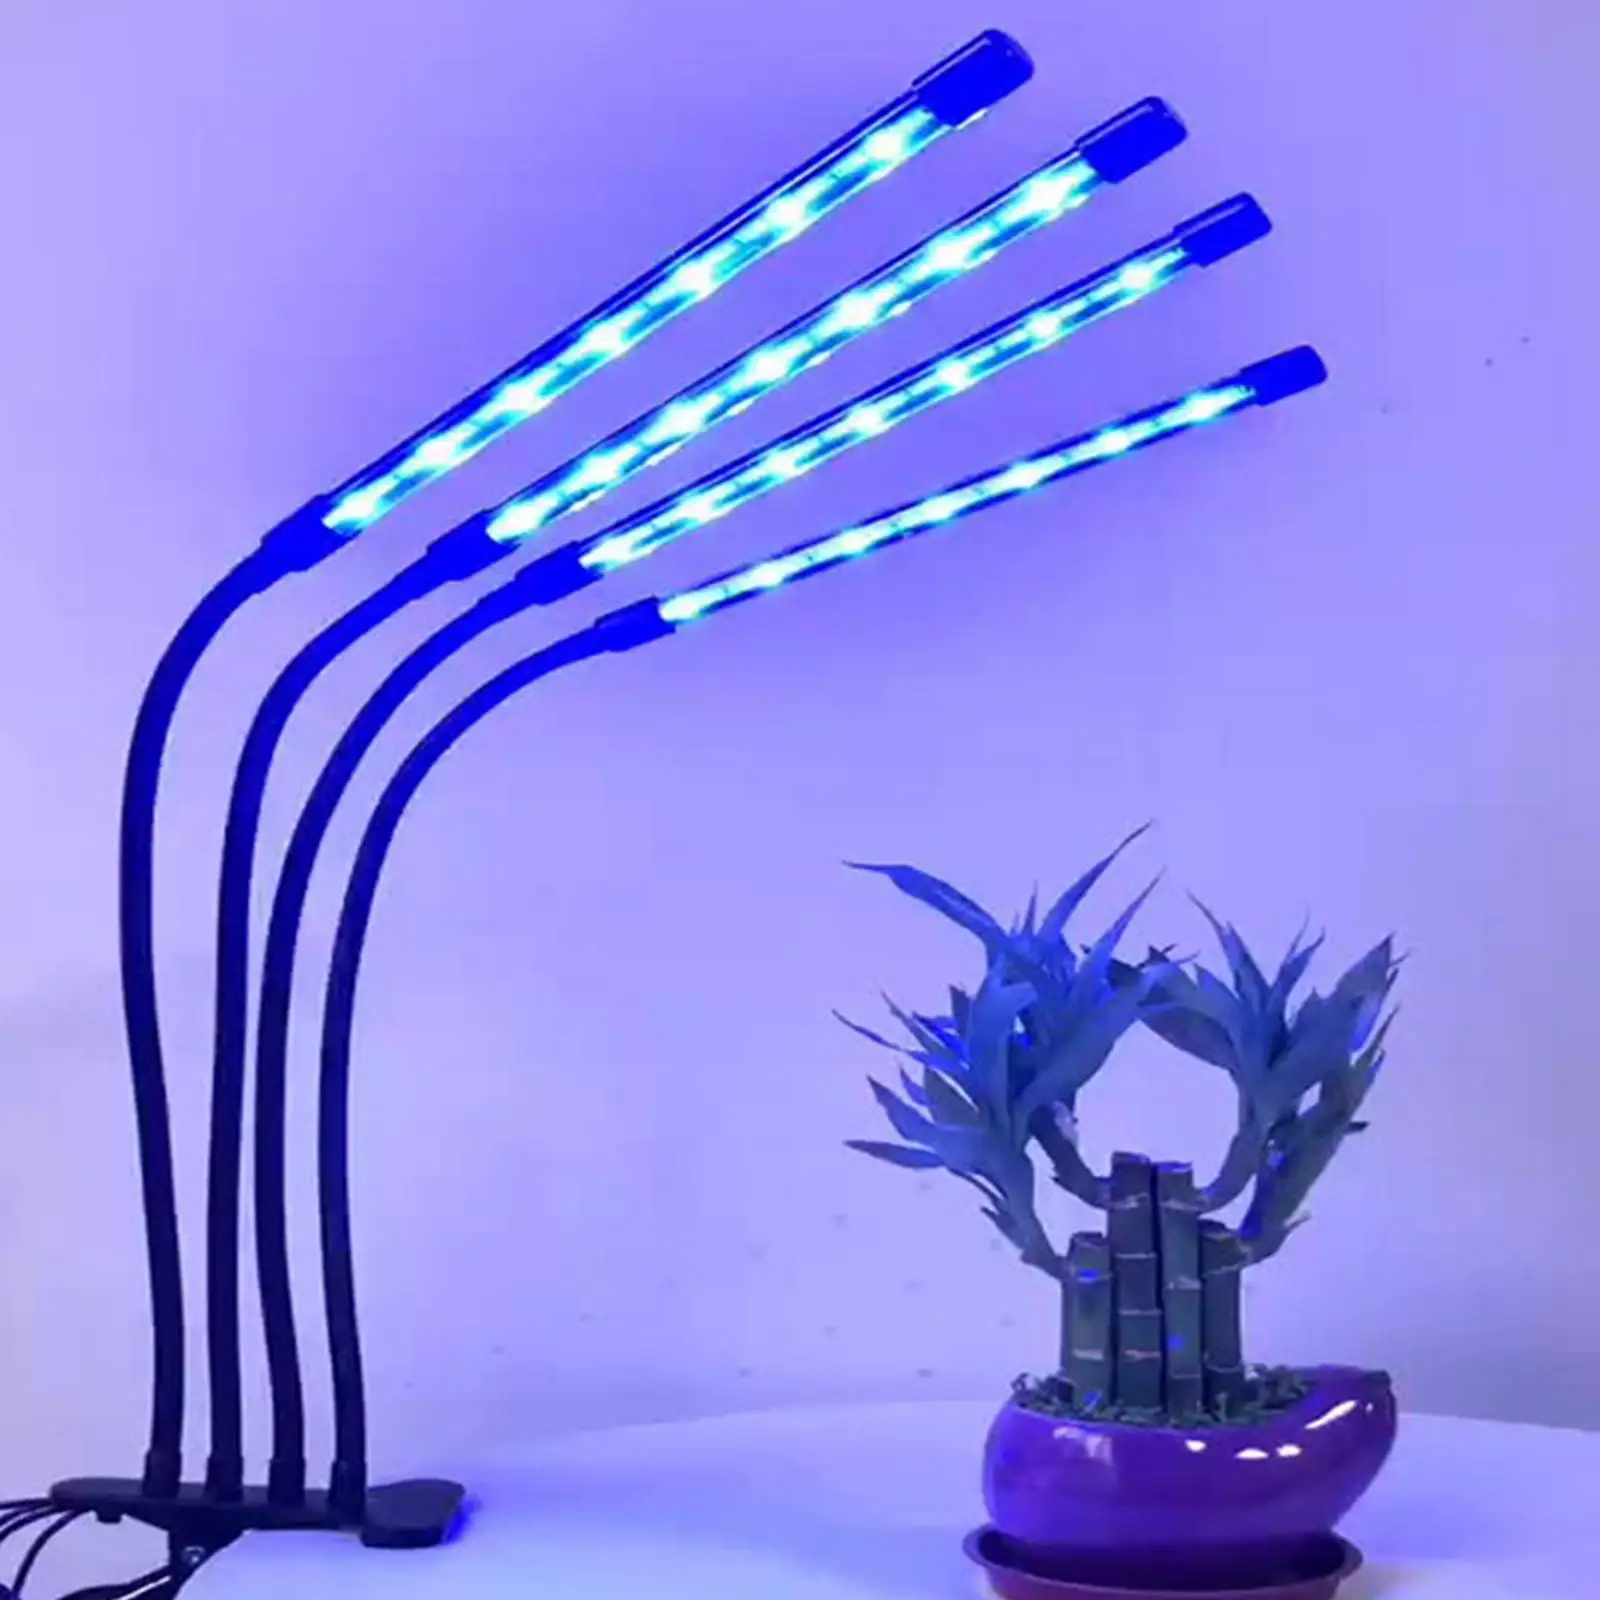 Plant Lamp 3 Modes Auto Off Timing 3 9 12Hrs Indoor Plants Grow Light for Gardening Flowers Seedling Vegetables Indoor Plants